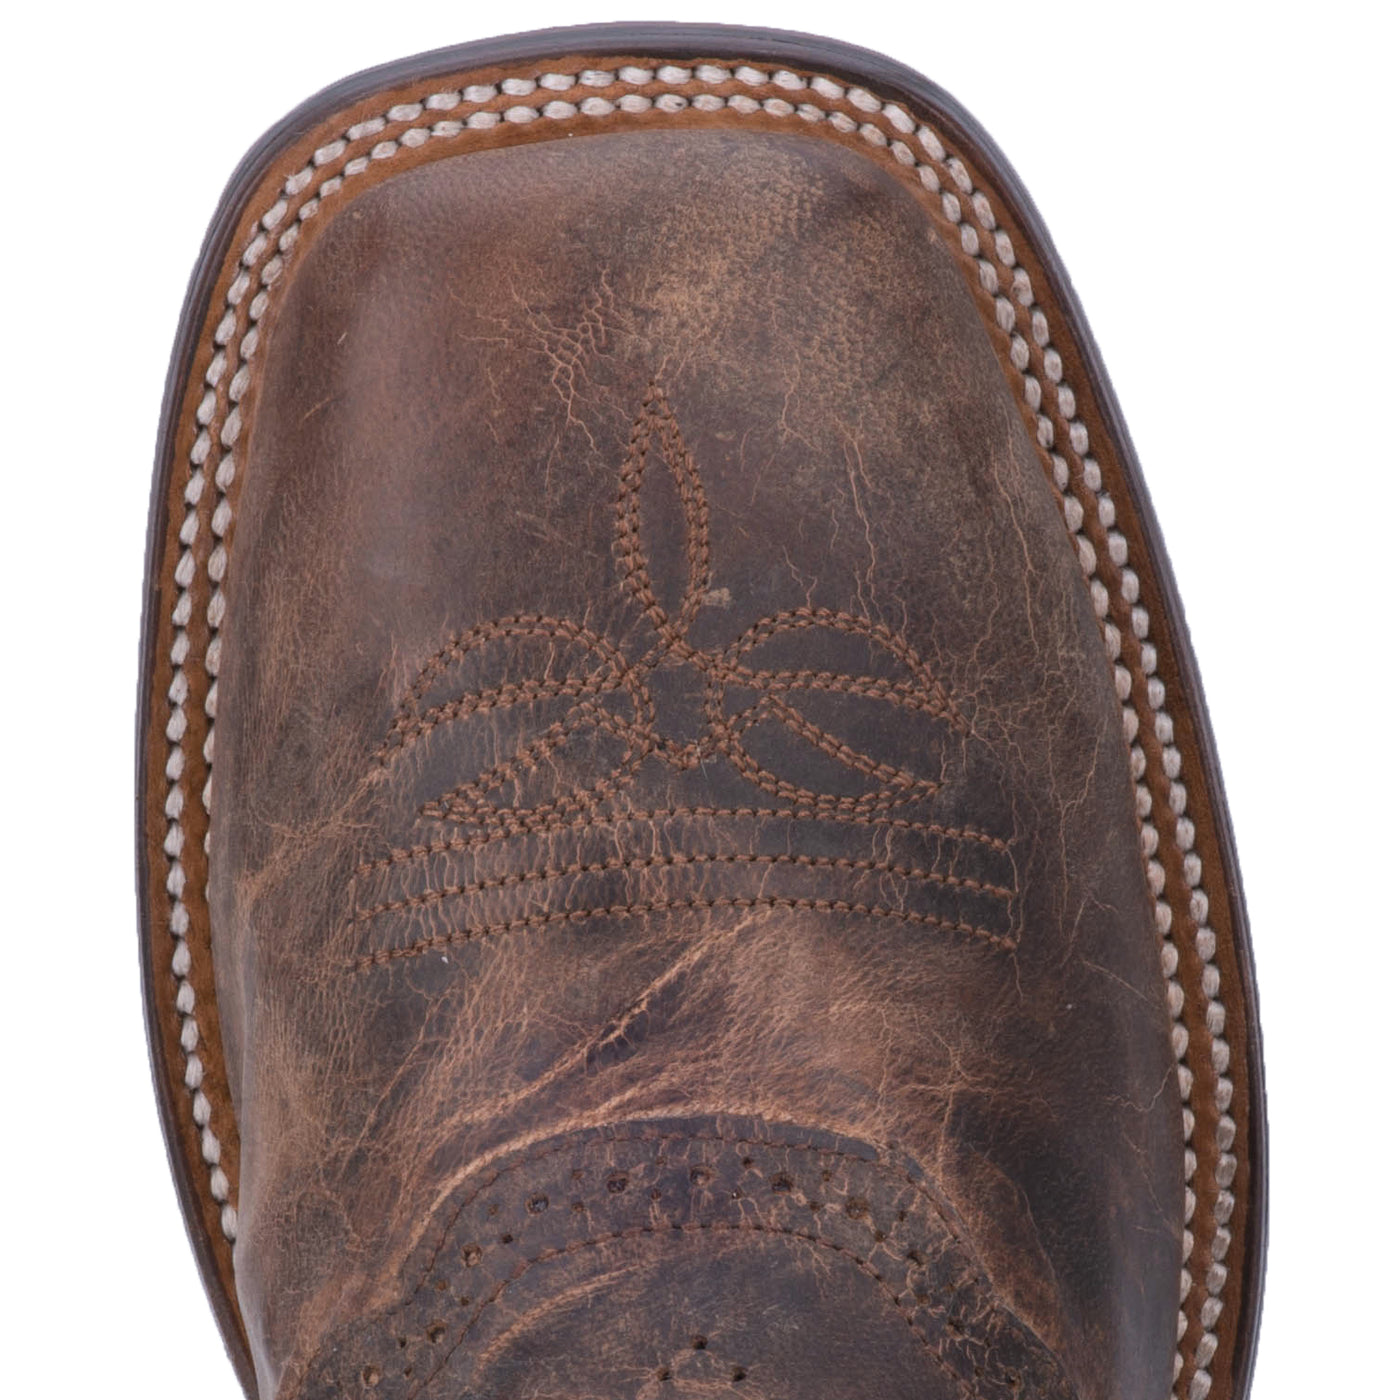 It's no wonder the Cowboy Certified Franklin boot is the most popular style in the line. This rugged, yet refined boot features a sand mad cat leather foot and black leather shaft. Fully leather lined with an Ultimate Gel-Flex insole, double-stitched welt, broad square toe, and 7/8” Stockman heel.  Style: DP2815